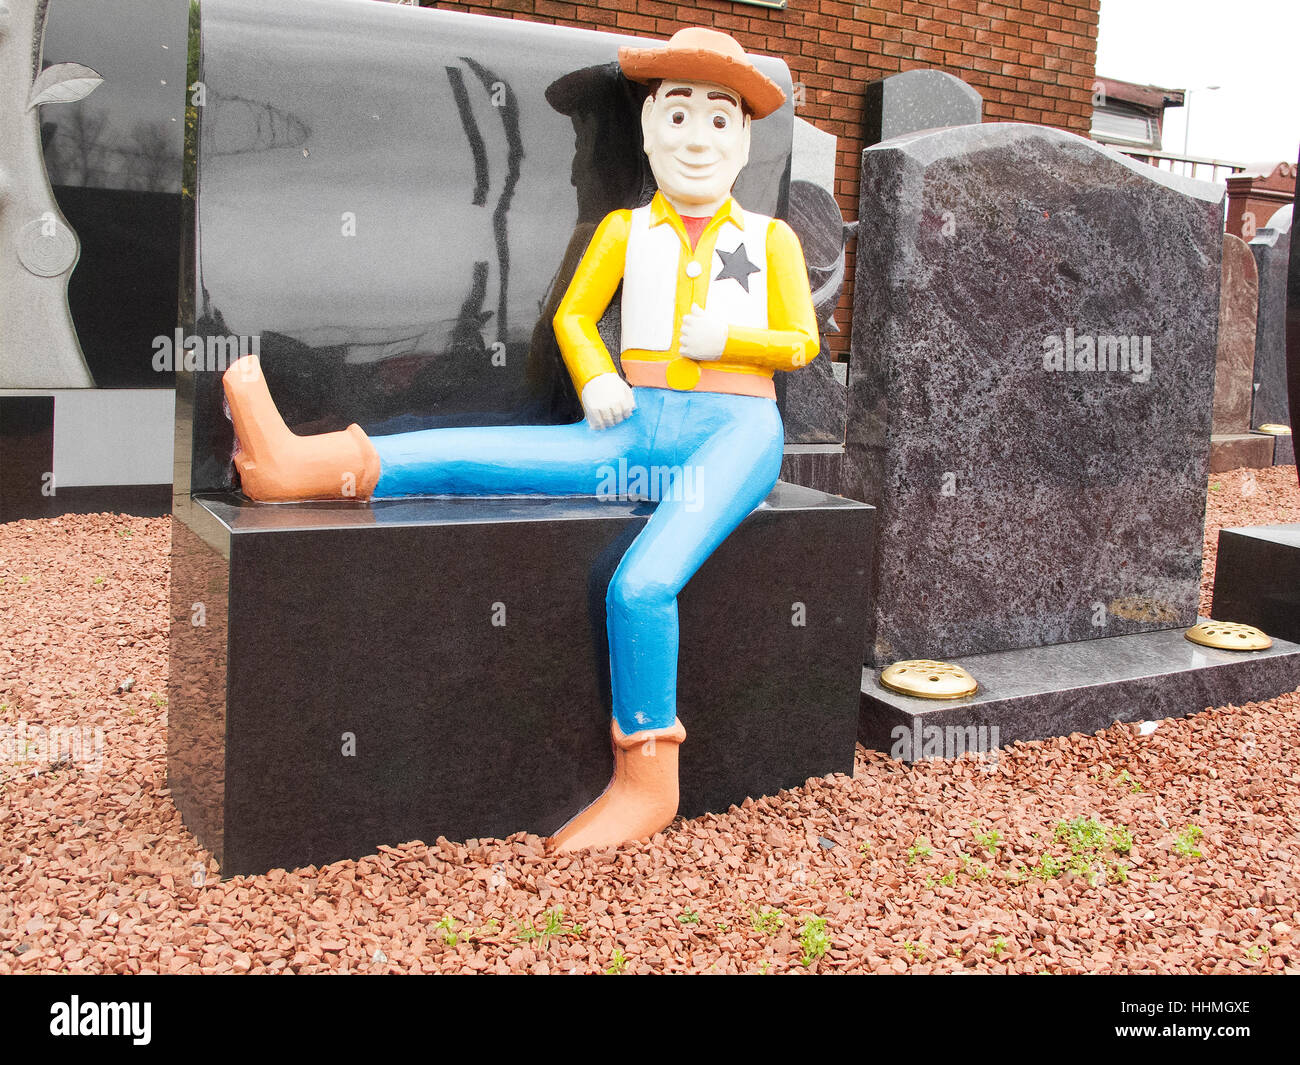 Graveyard Headstone featuring Woody from Toy Story. Stock Photo